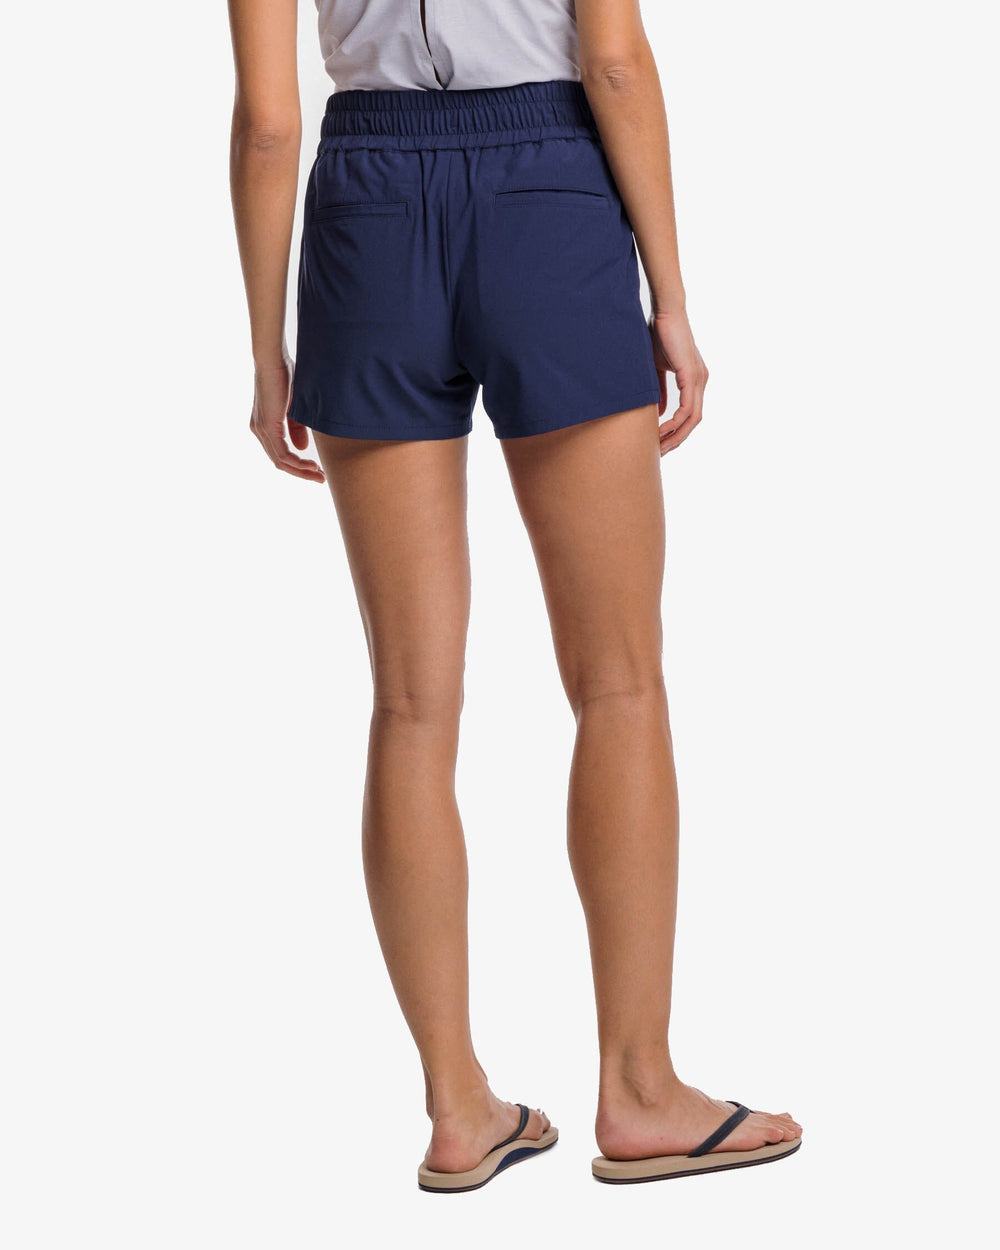 The back view of the Southern Tide Neeley brrr Performance Short by Southern Tide - Nautical Navy